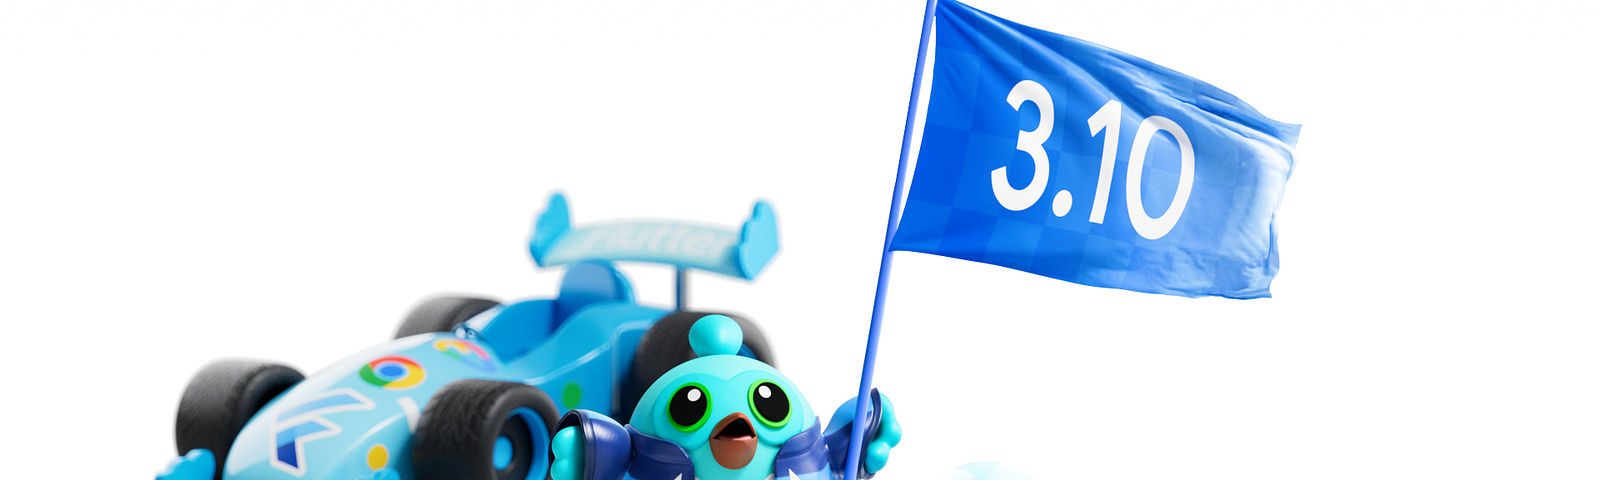 A fun image of the Flutter mascot, Dash, standing by a racecar. She is holding a blue flag with “3.10” printed on it.